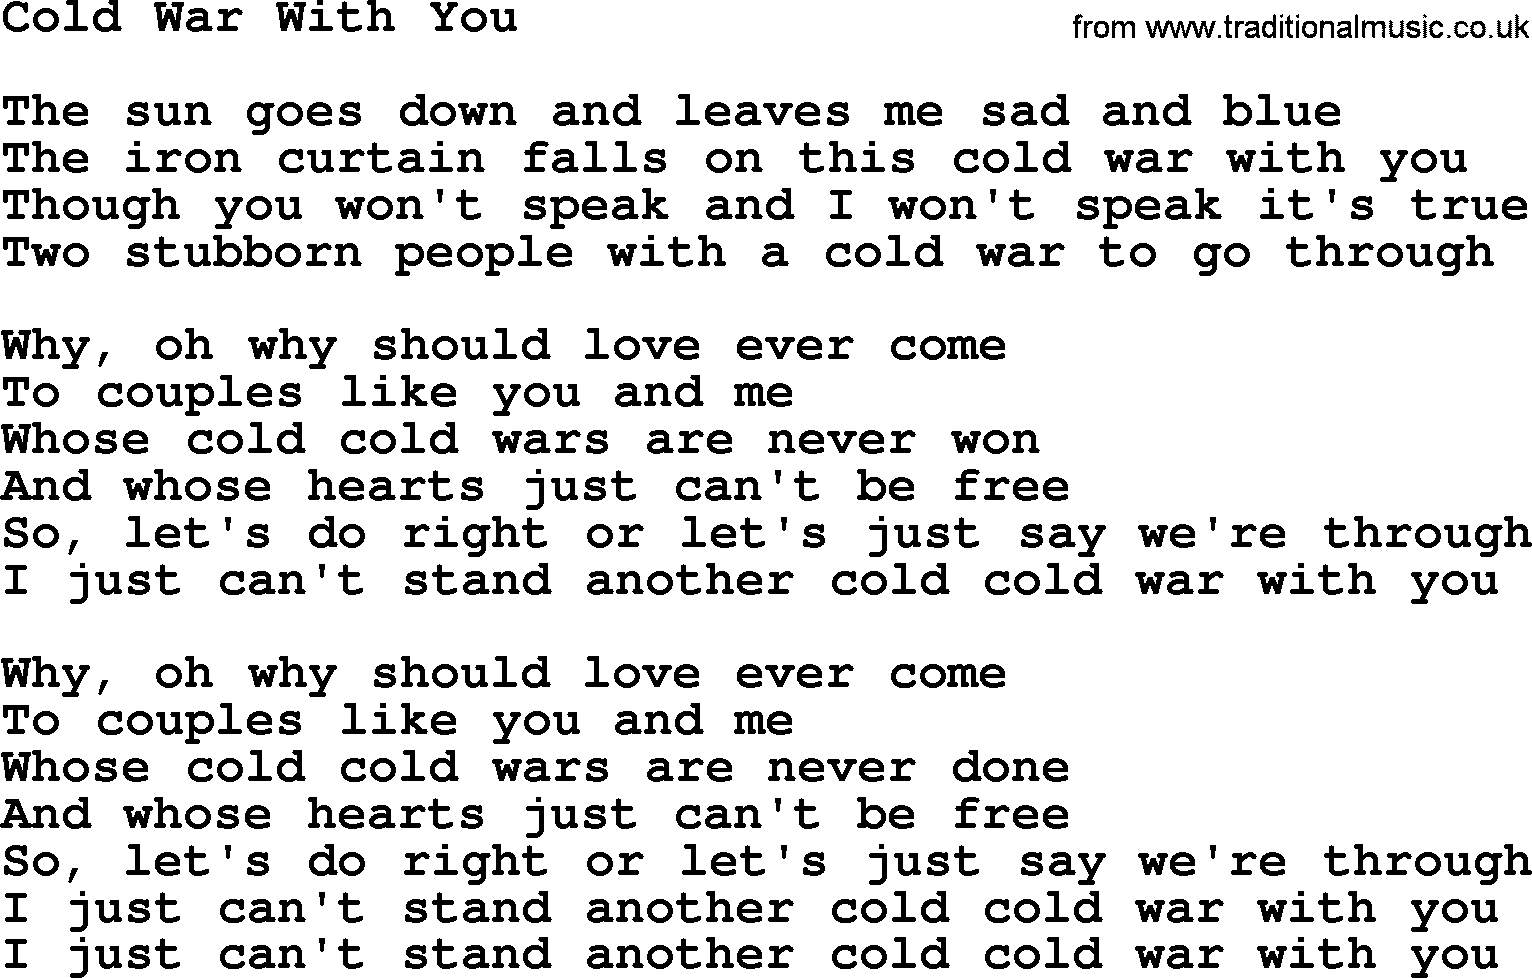 Willie Nelson song: Cold War With You lyrics